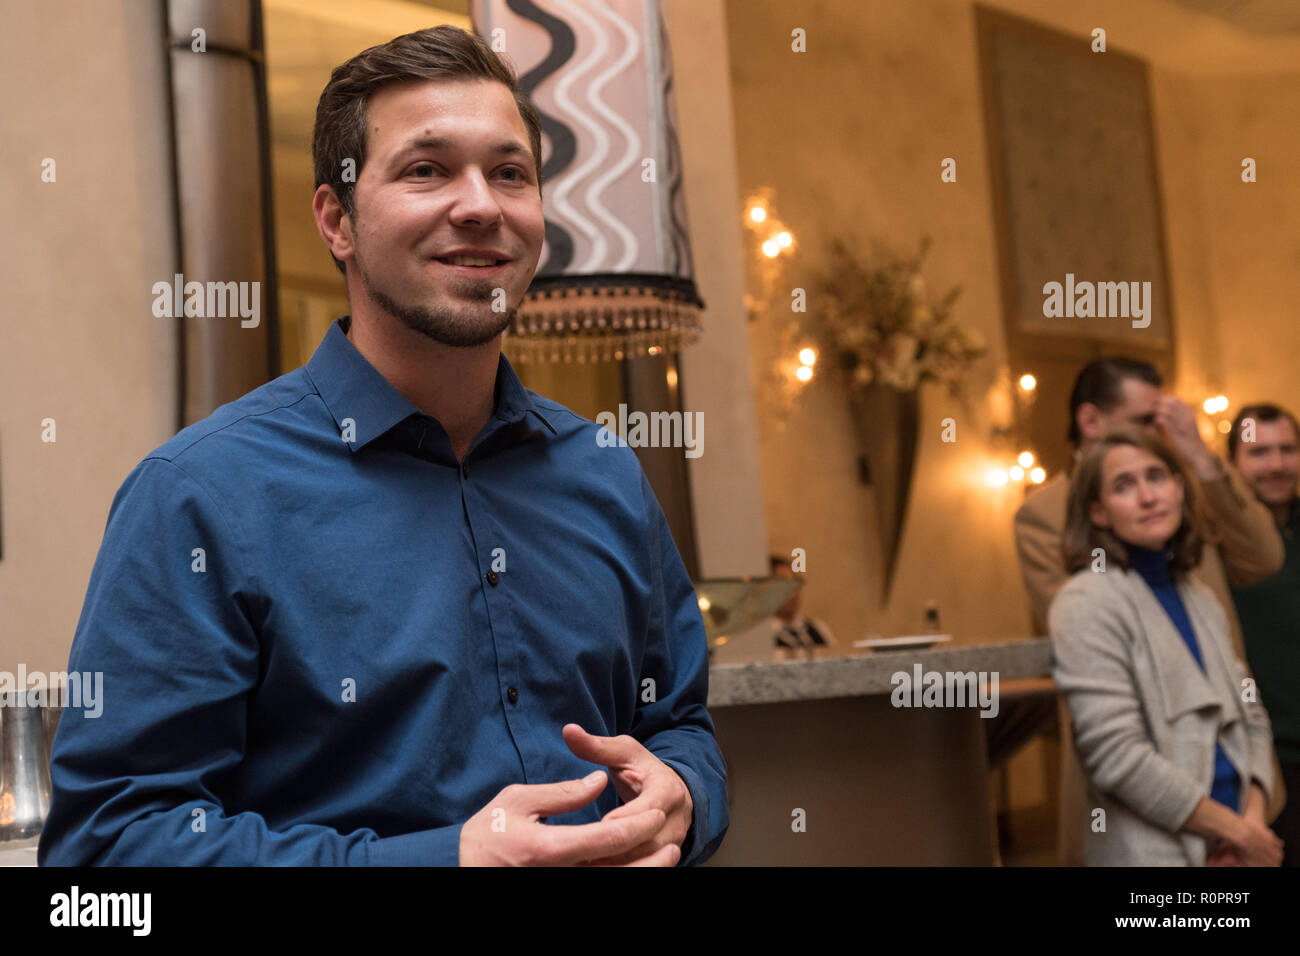 Elk Grove Village, IL, USA. 6th Nov, 2018. Cook County Board  Commissioner elect Kevin Borrini Morrison at his election night  party at Belvedere Banquet Hall in Elk Grove Village, IL, USA.  Credit: Serhii Chrucky/Alamy Live News. Stock Photo